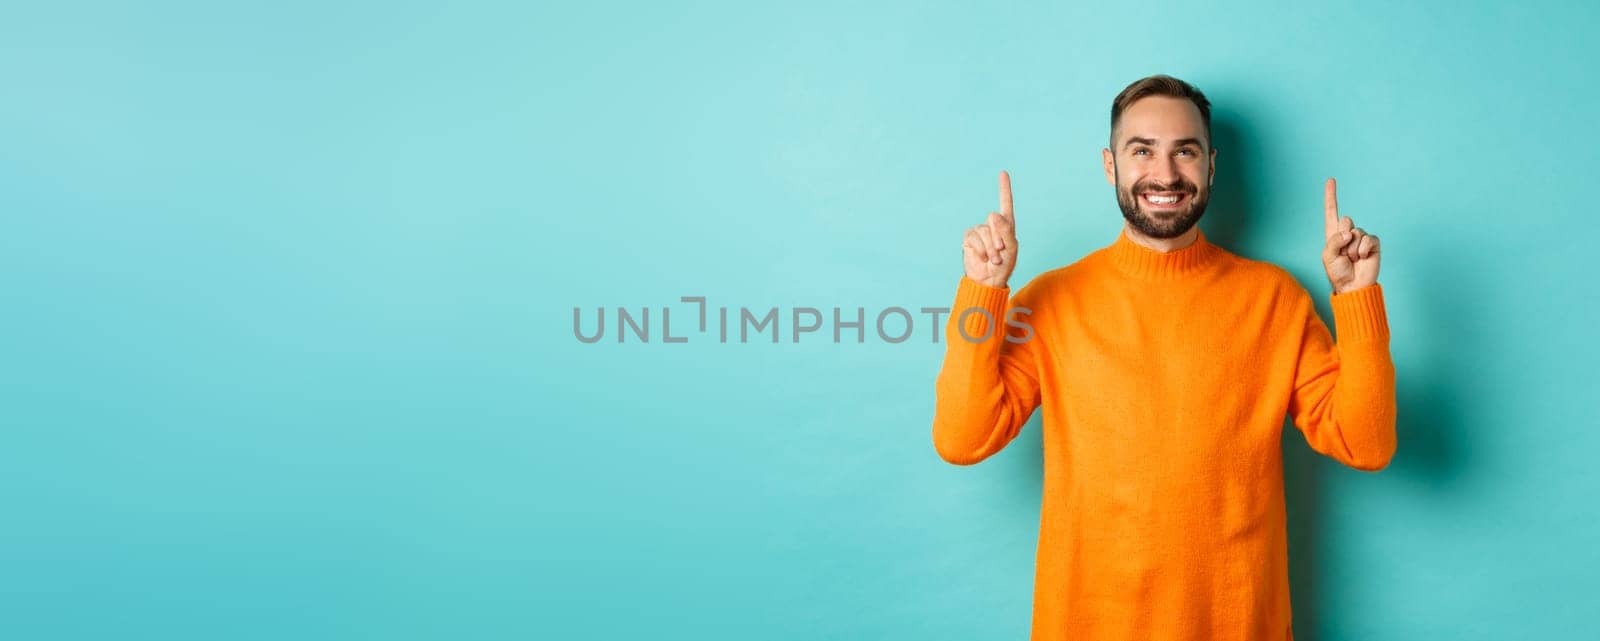 Satisfied and happy buyer pointing fingers up, smiling pleased, standing in orange sweater against turquoise background.